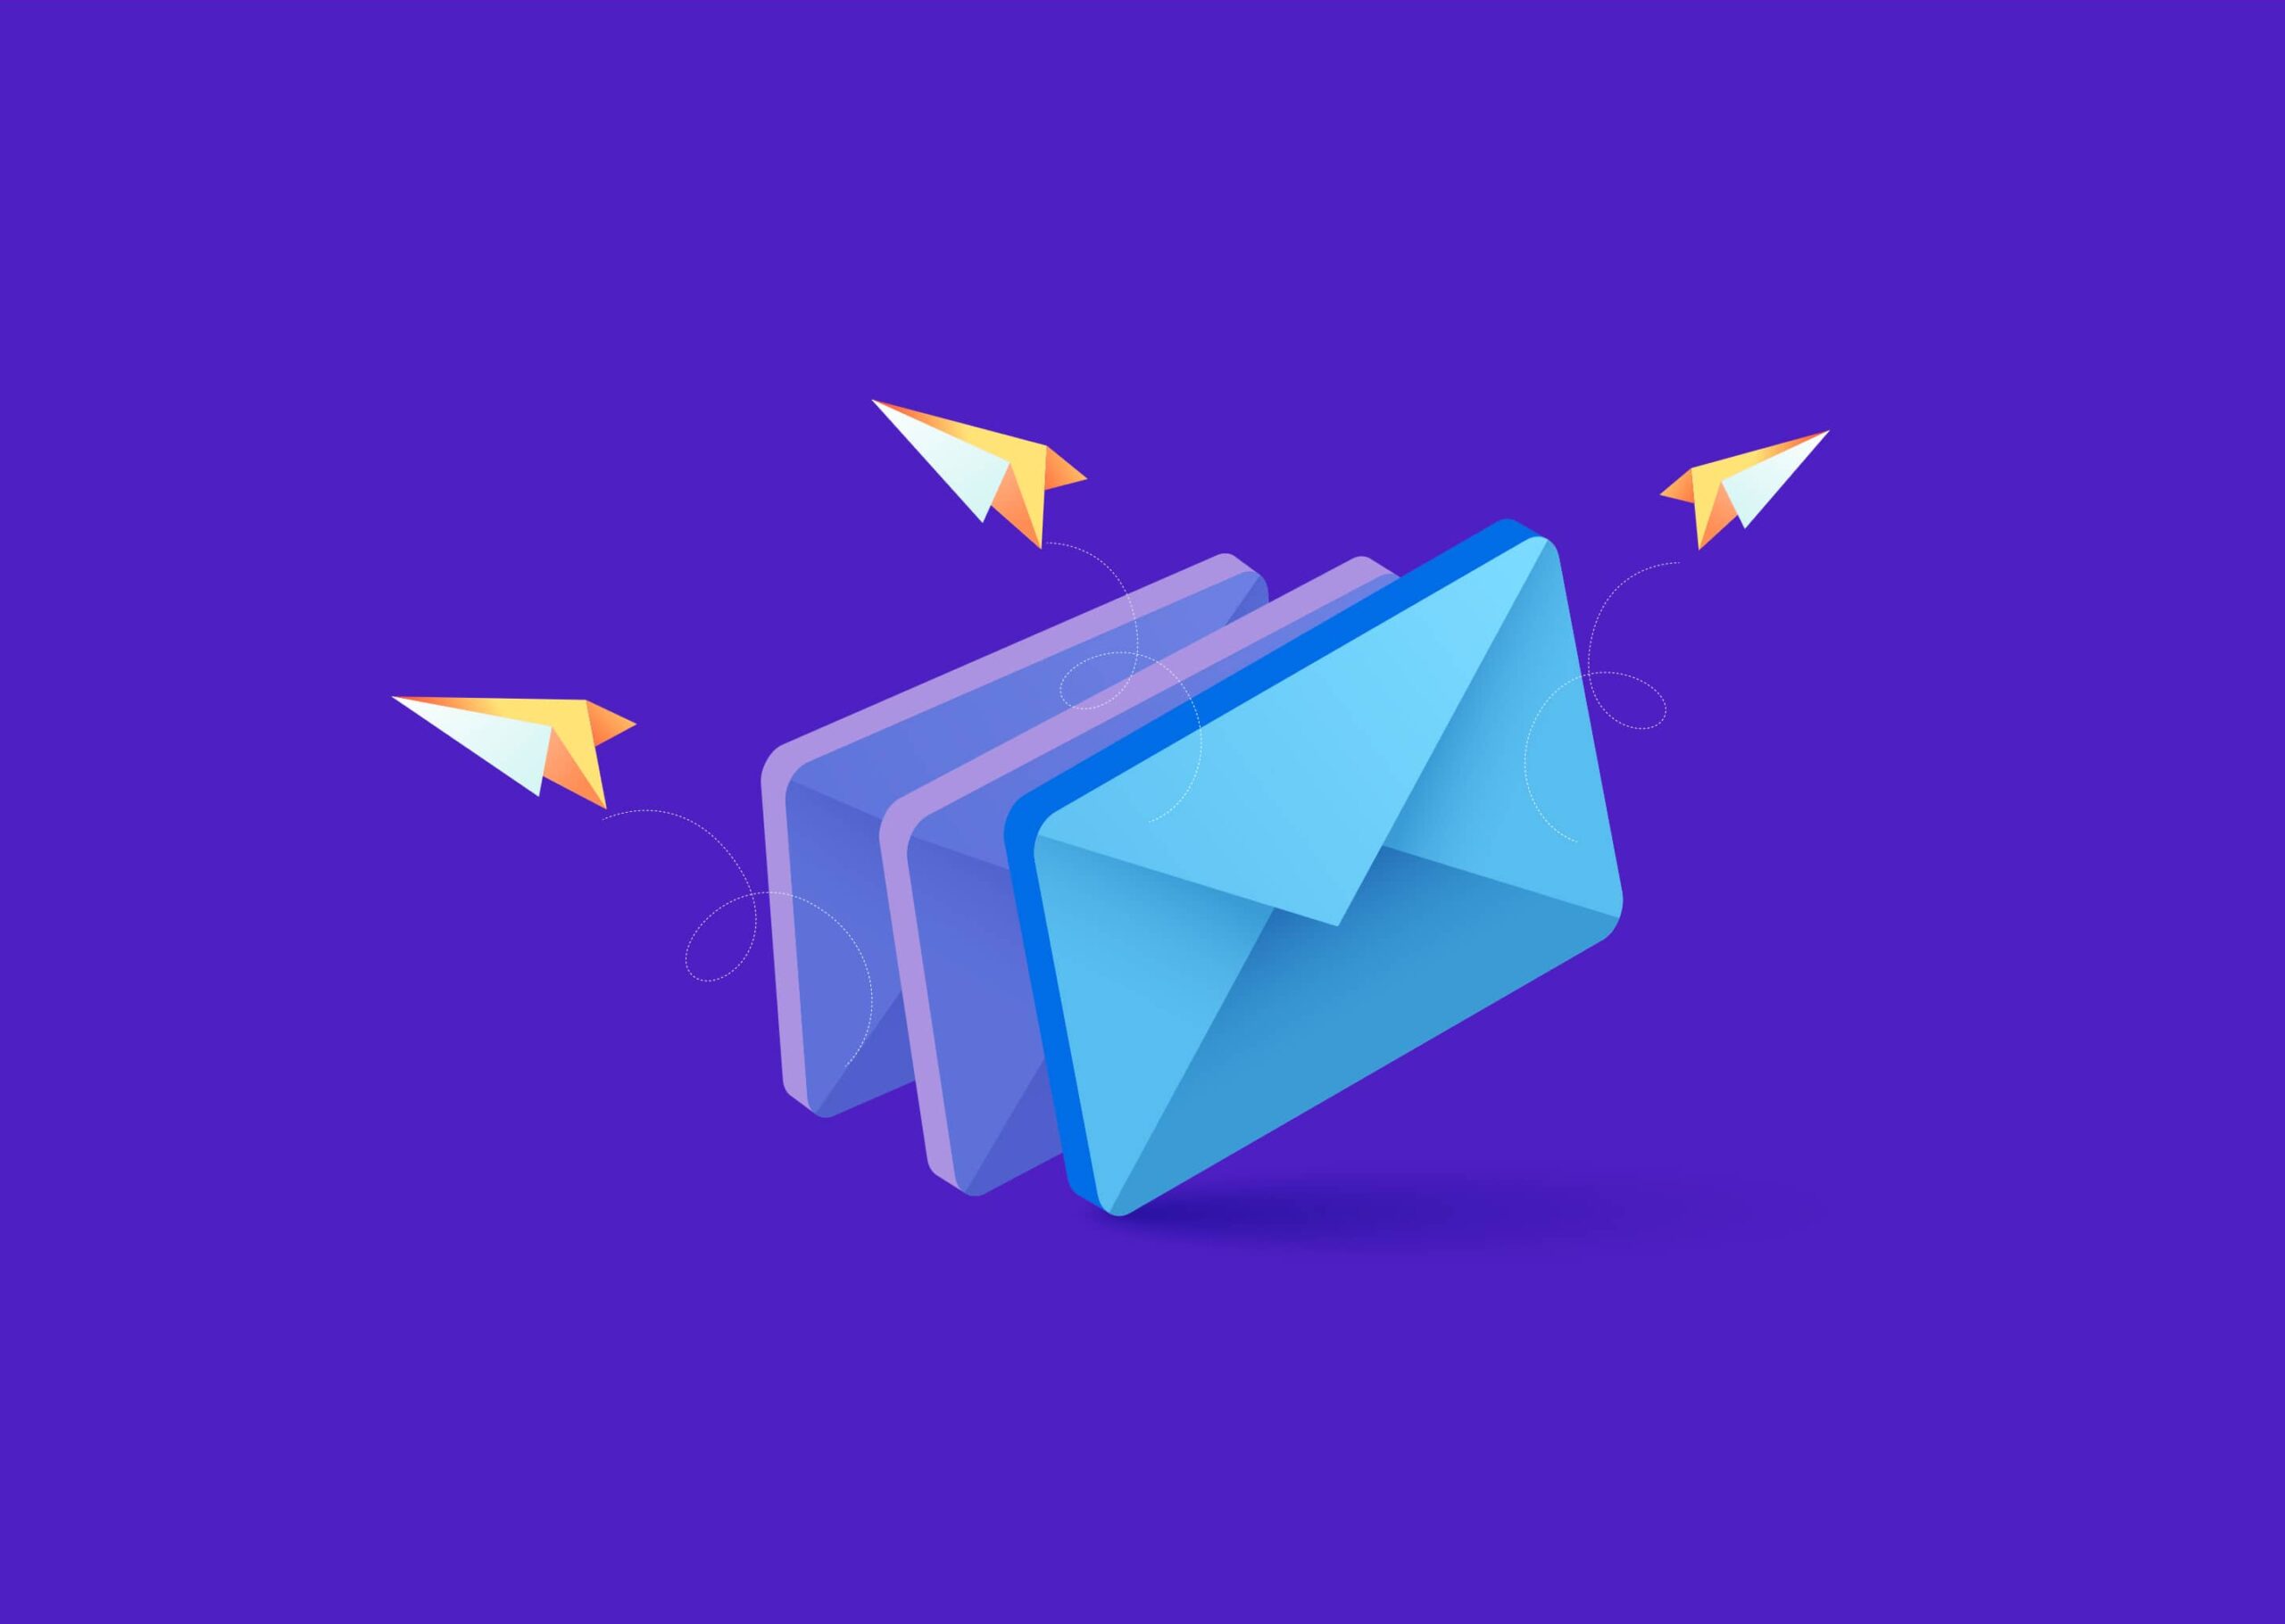 20 email marketing tips